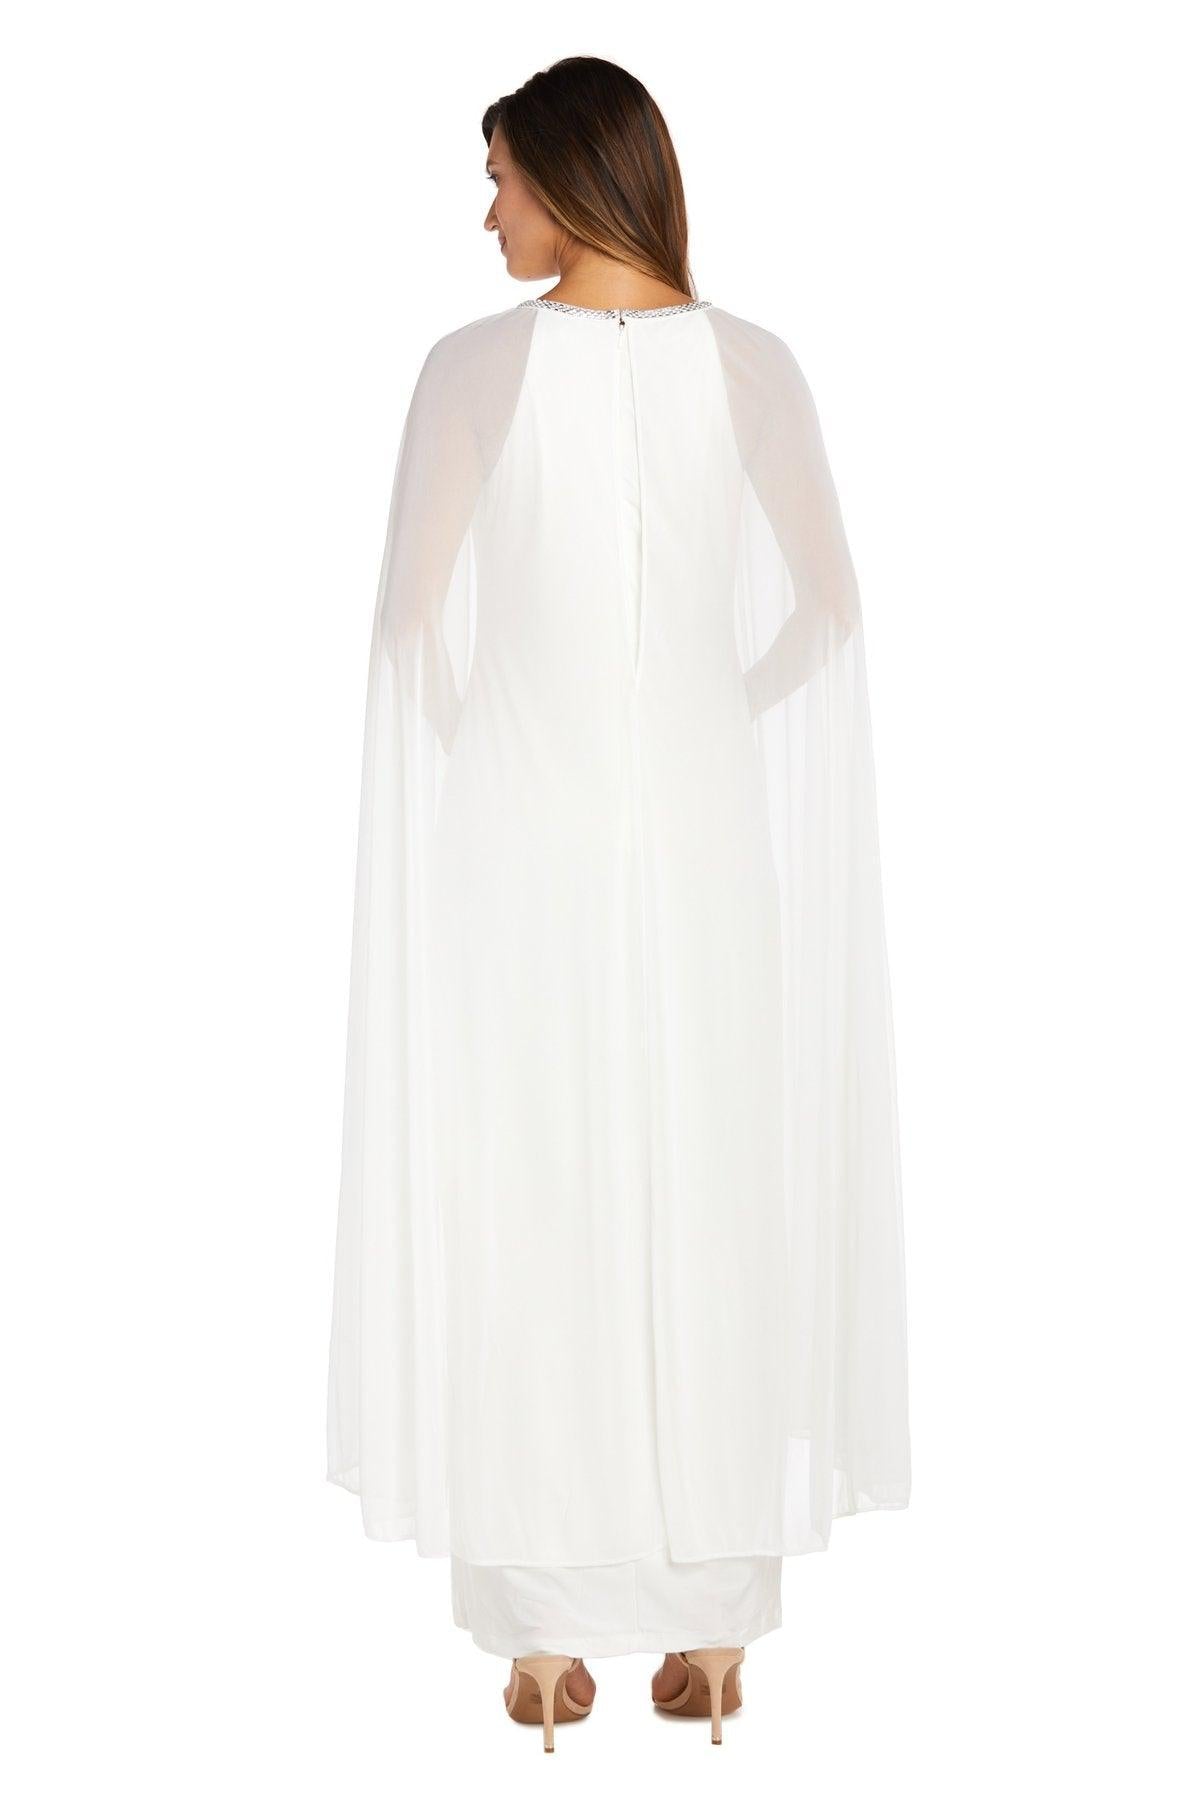 R&M Richards Long Mother of the Bride Dress 2487 - The Dress Outlet